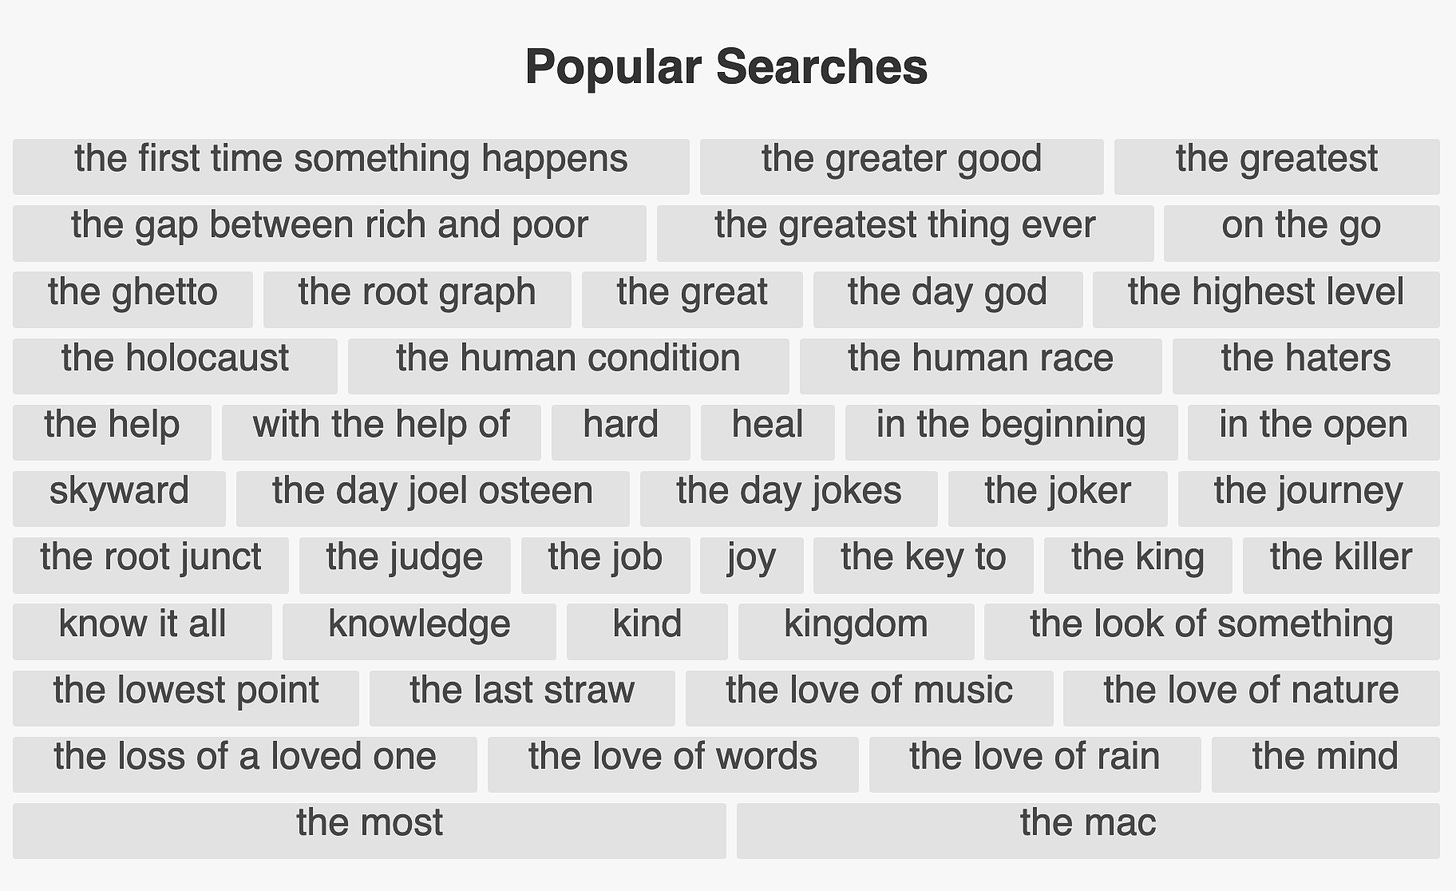 Examples of Reverse Dictionary searches